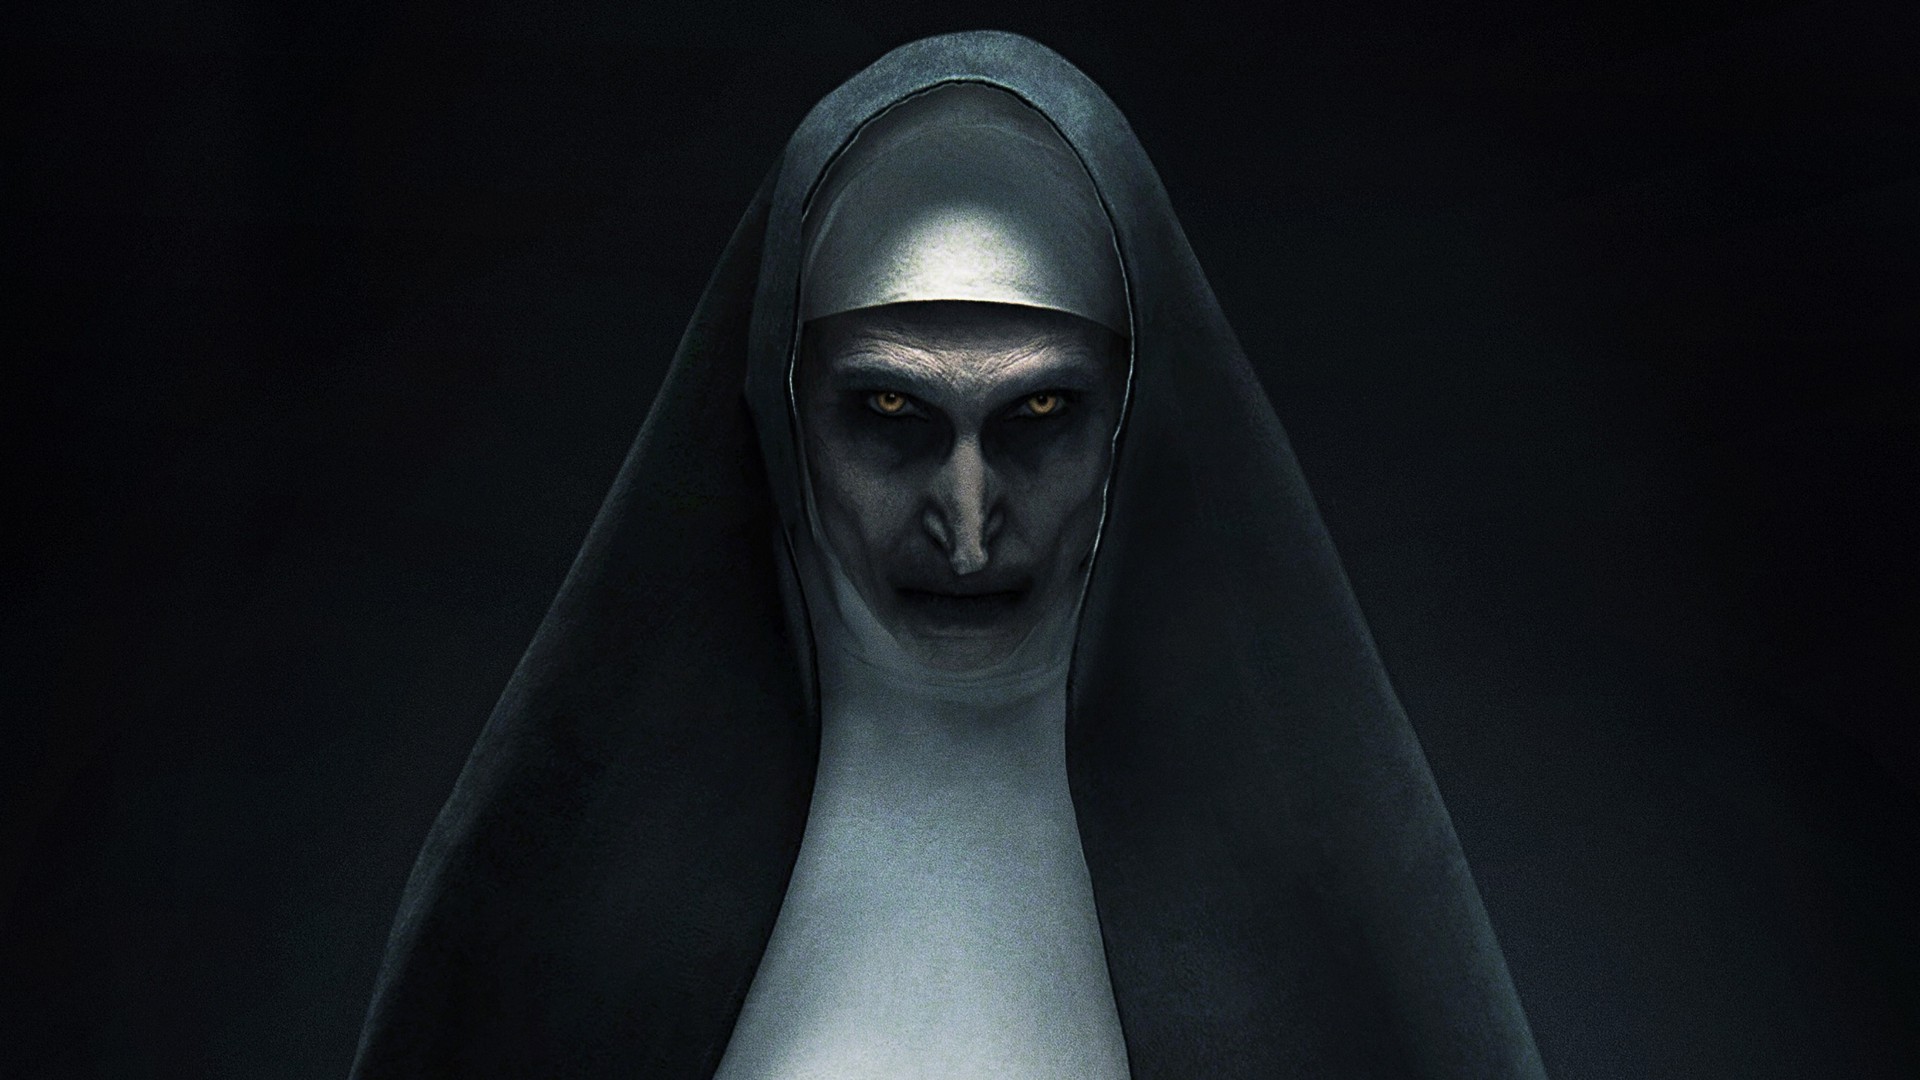 Wallpaper The Nun Desktop with resolution 1920X1080 pixel. You can use this wallpaper as background for your desktop Computer Screensavers, Android or iPhone smartphones